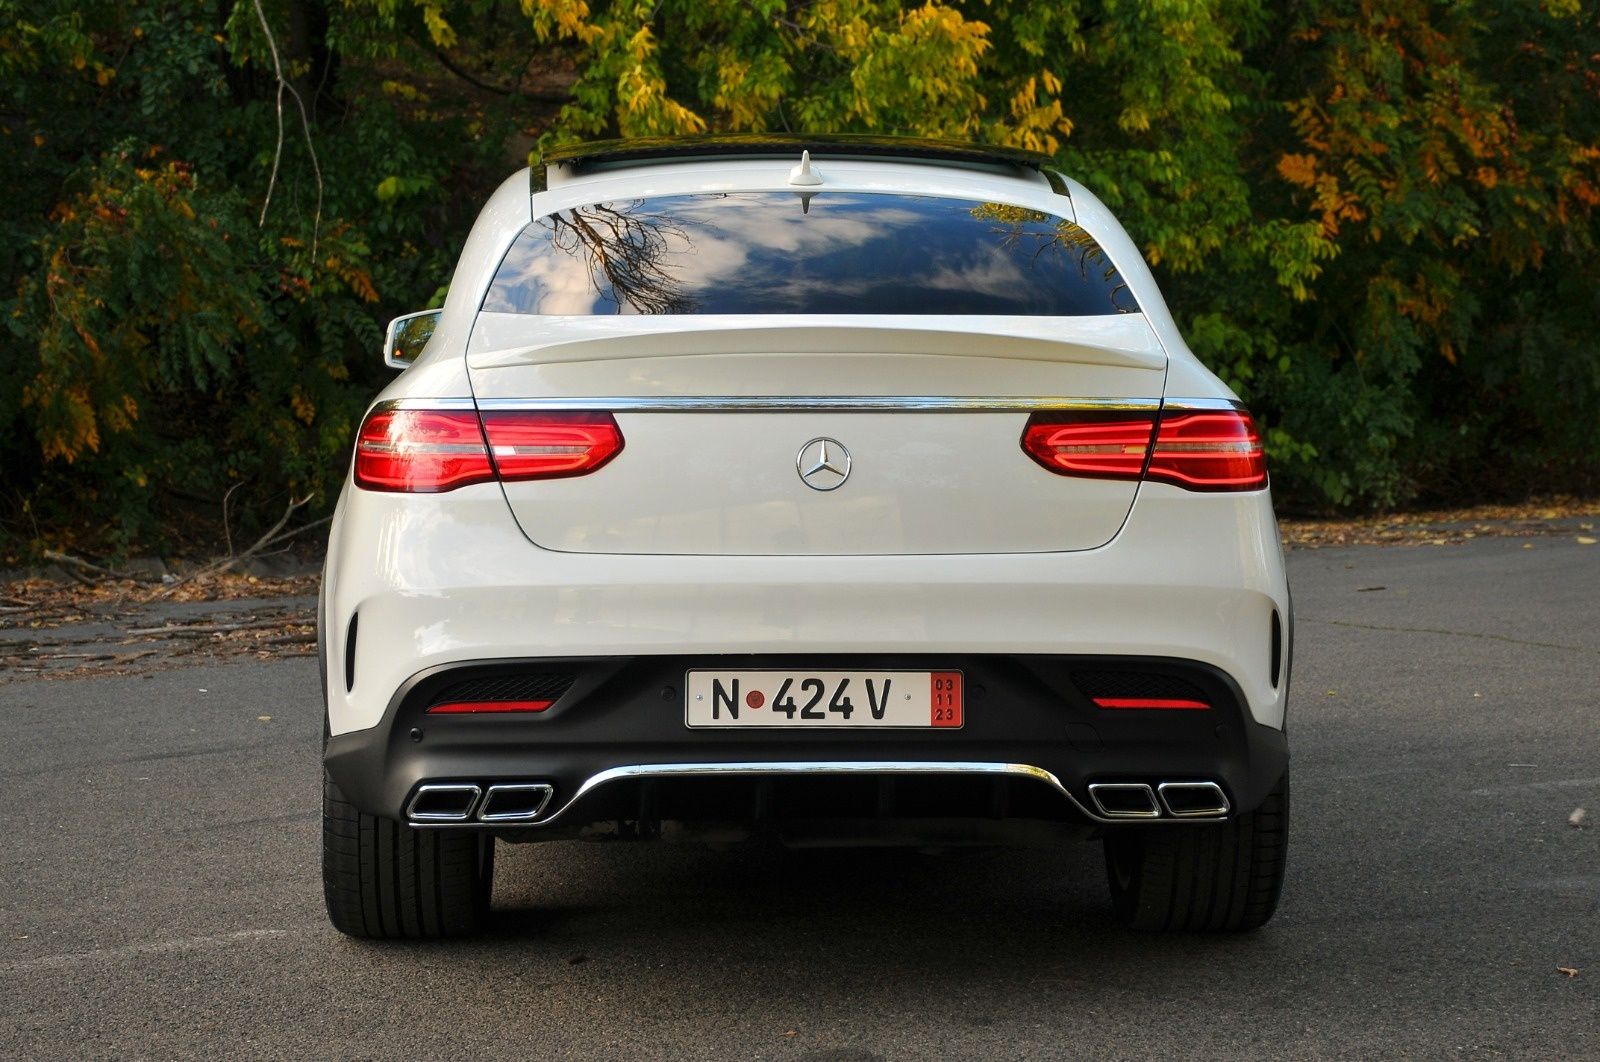 Mercedes GLE Coupe 2019